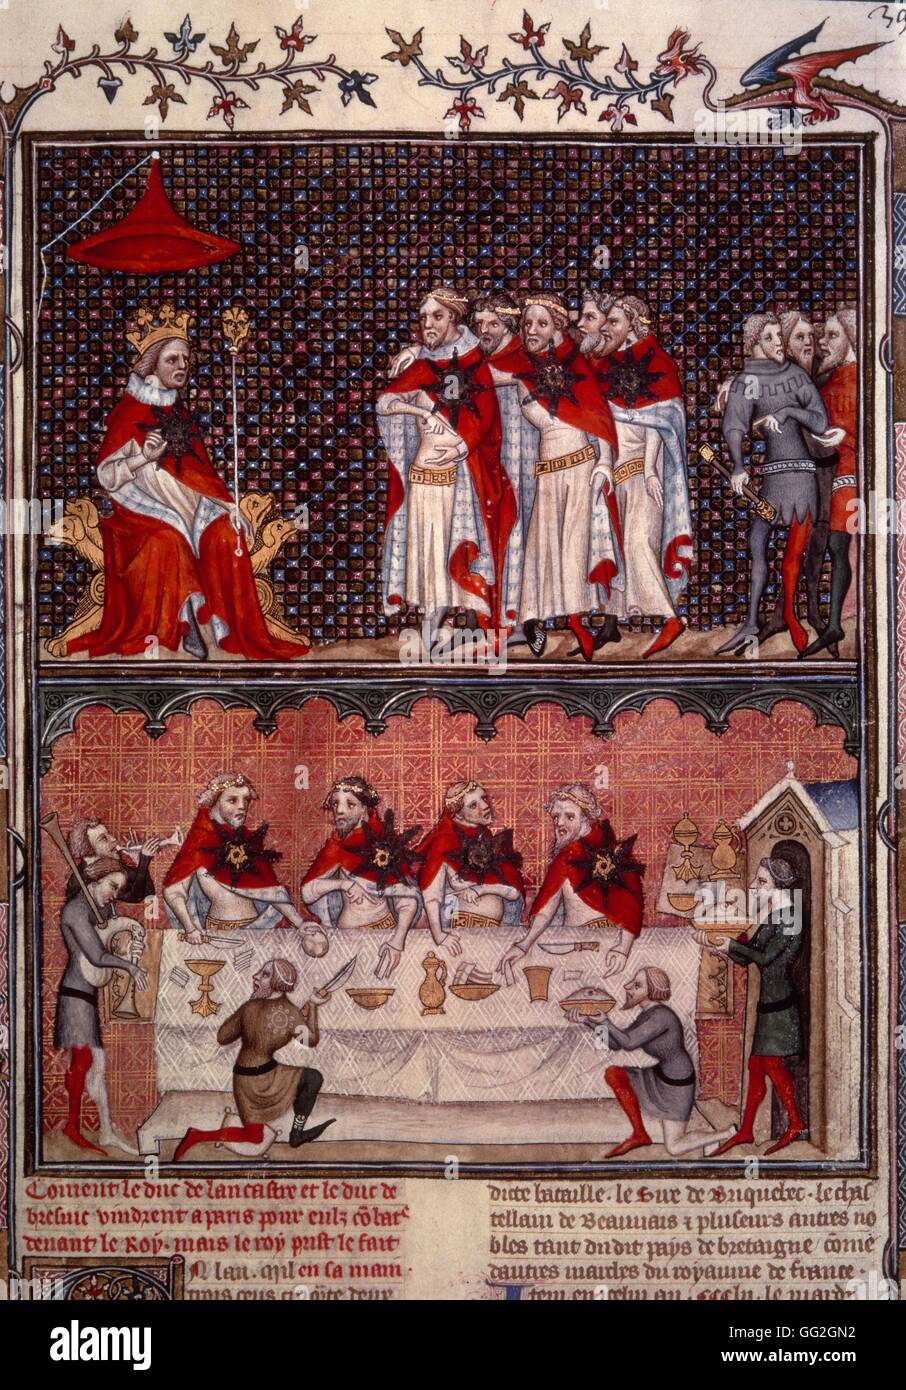 Banquet given by Charles V of France for the Emperor Charles IV in the large palace hall in 1378 Anonymous illuminated manuscript Paris, Bibliothèque Nationale de France Stock Photo